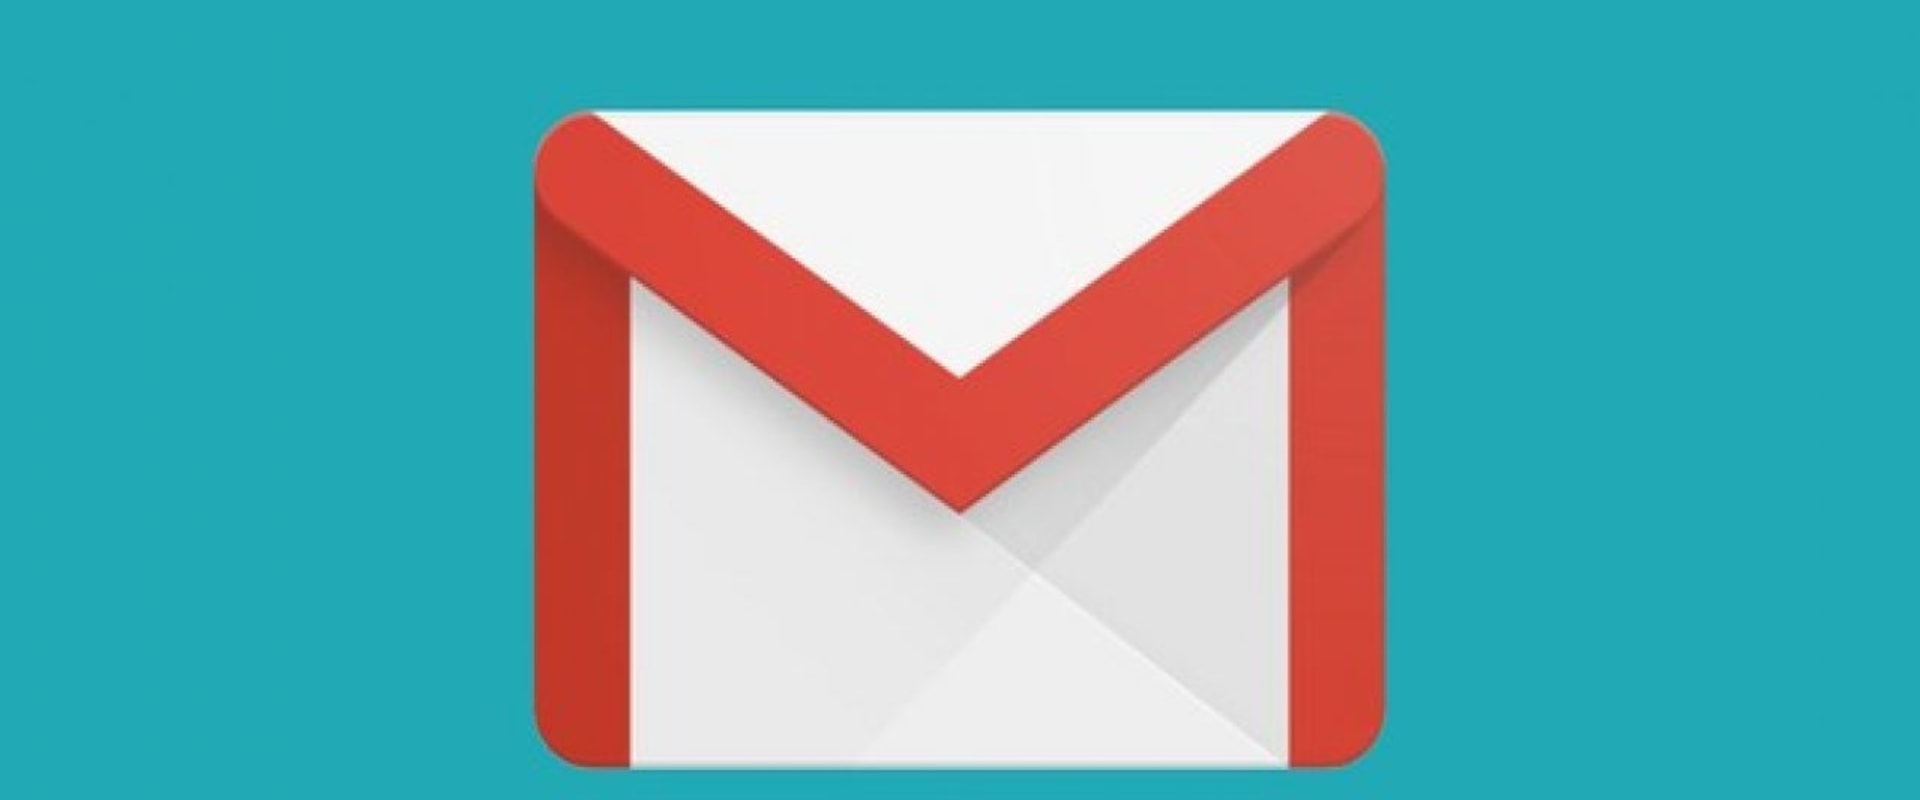 How to Recover a Truncated Email in Gmail